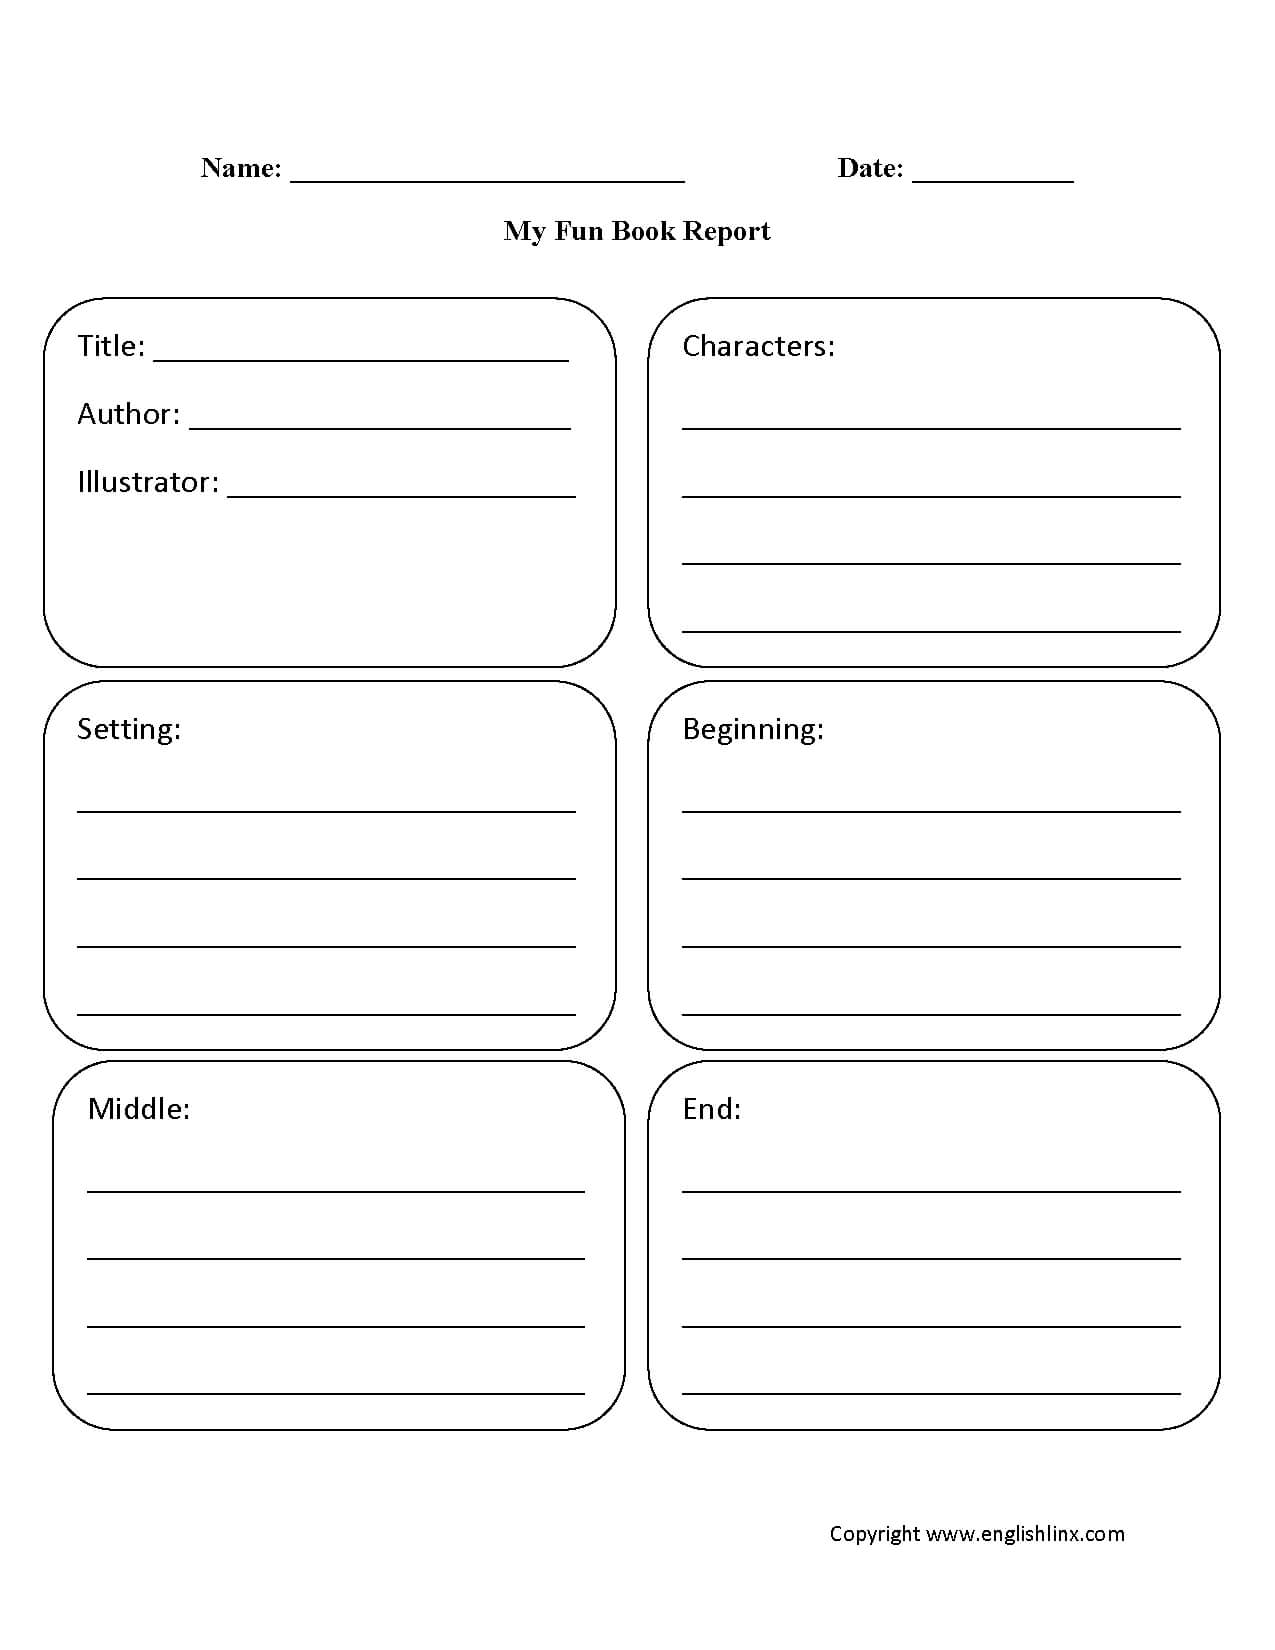 Financial Tatements Template Pdf For 2Nd Grade Book Report Throughout Second Grade Book Report Template